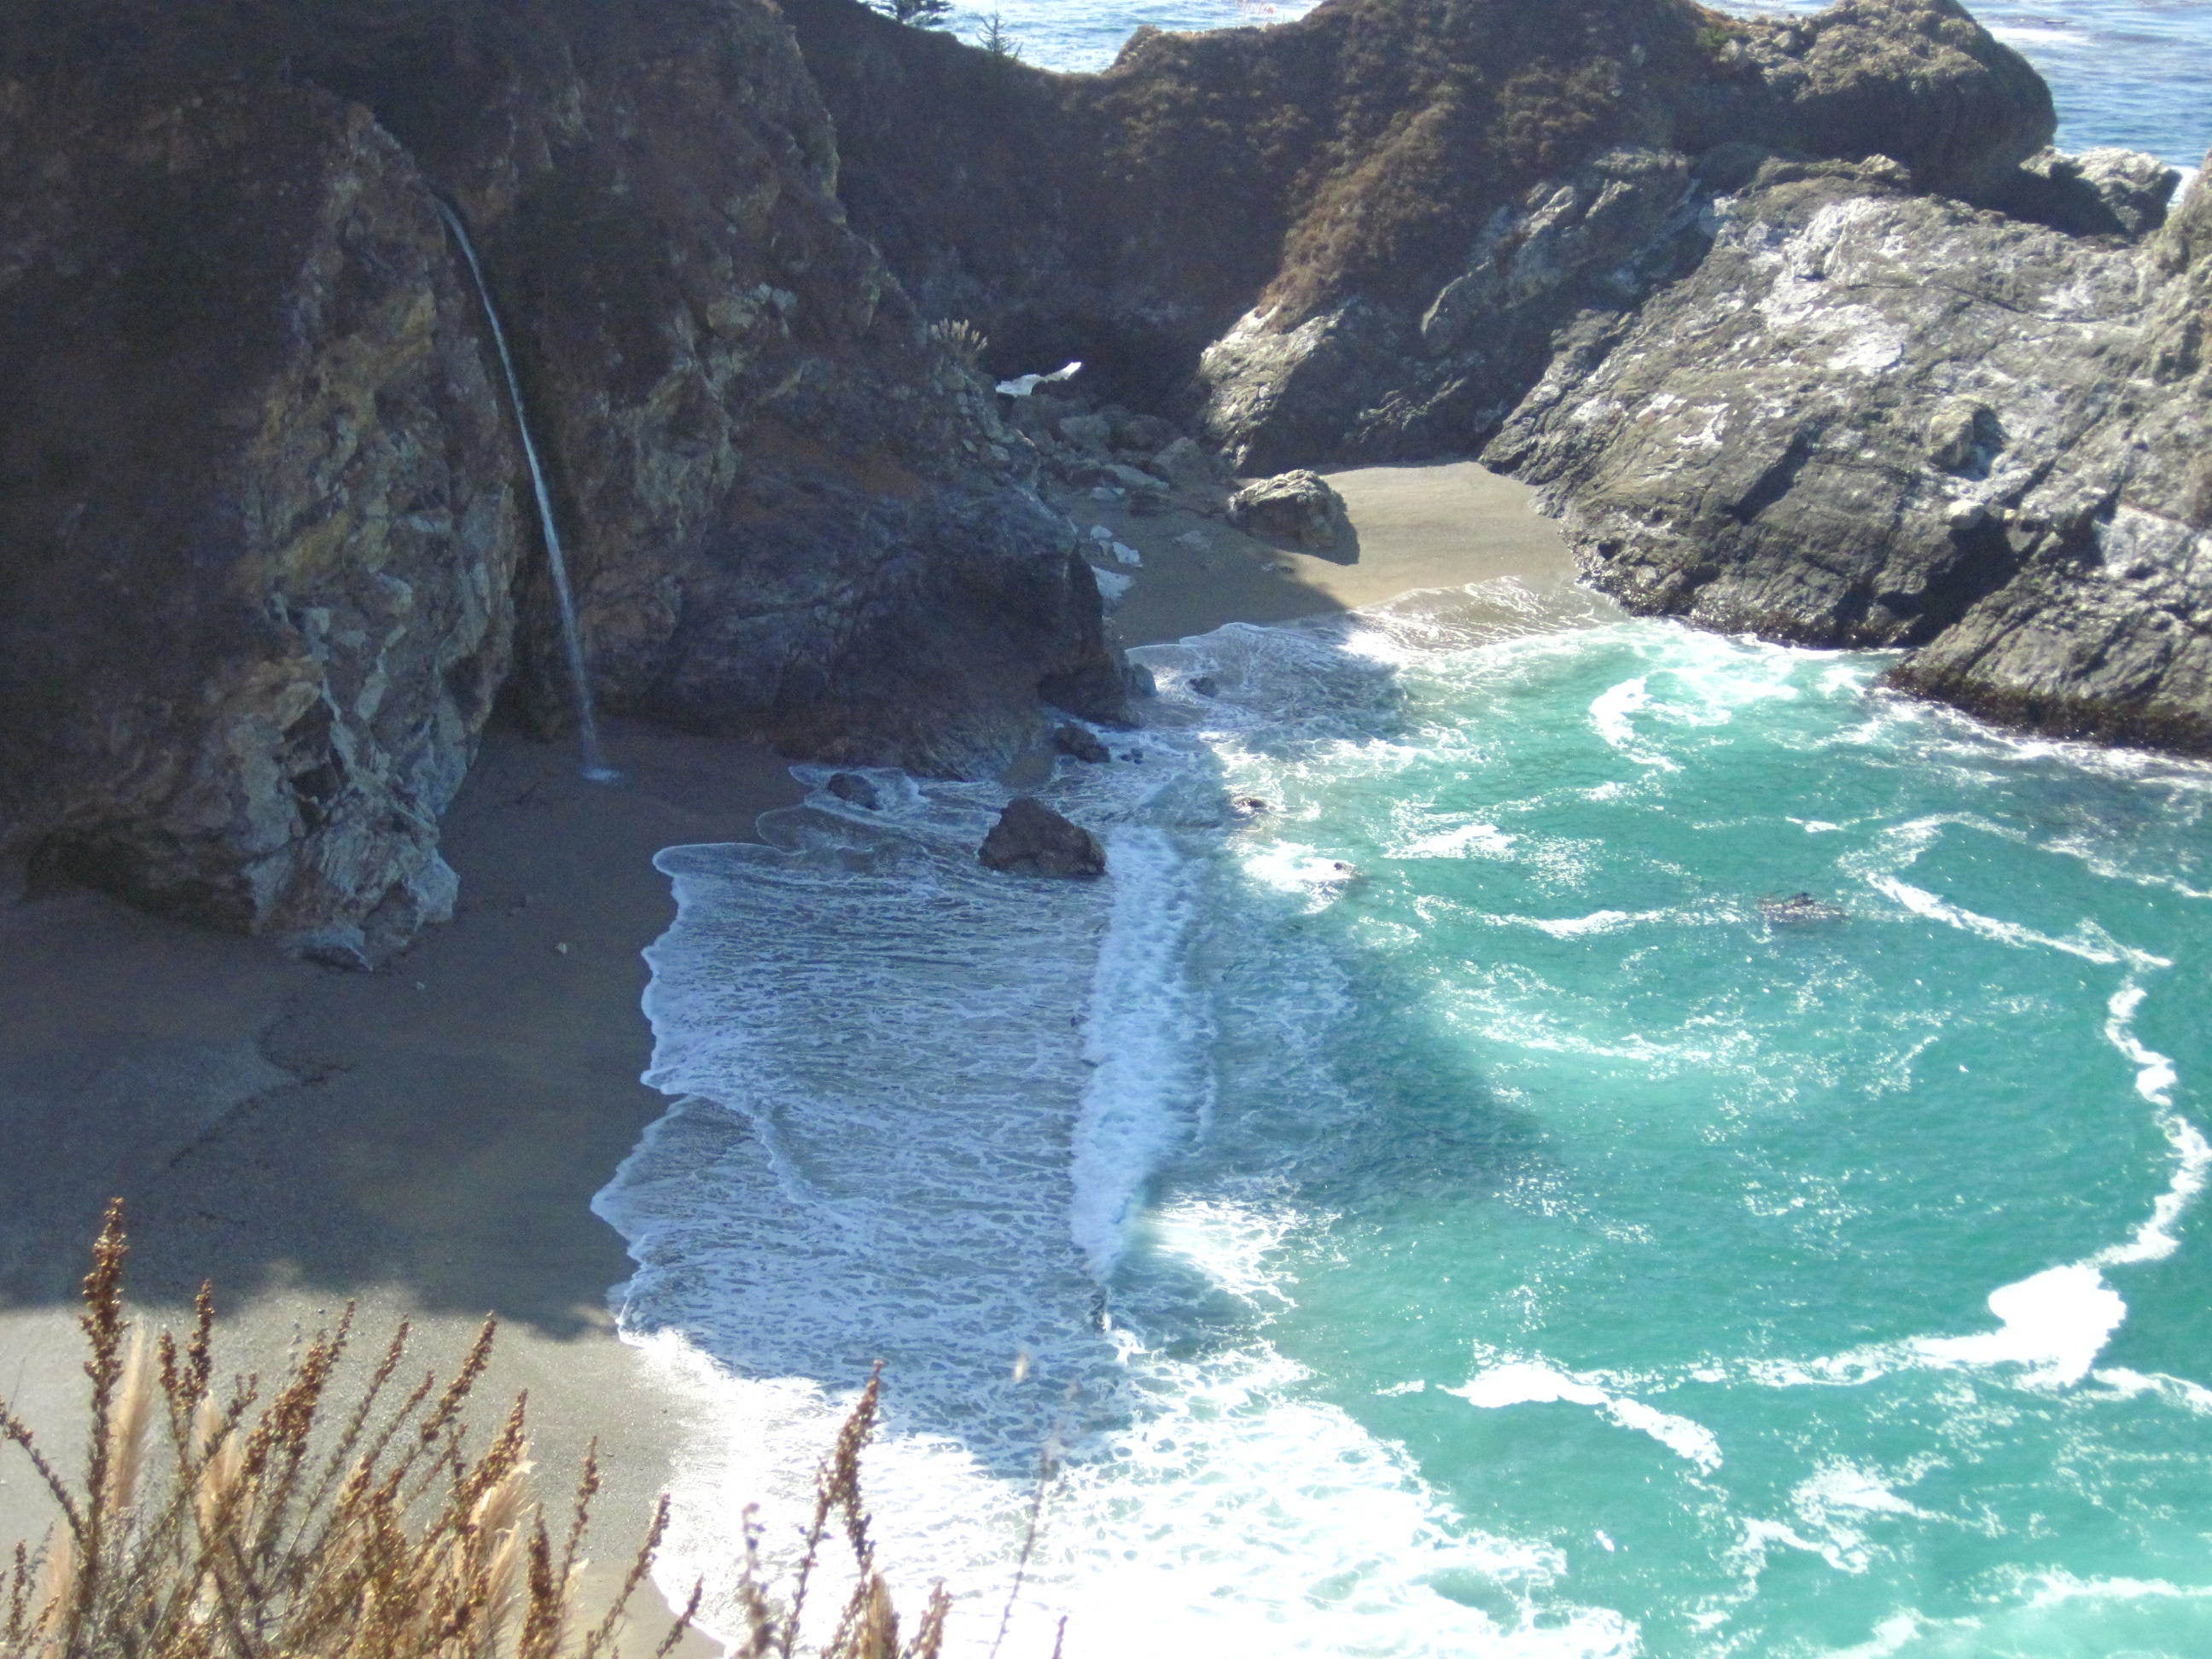 Camper submitted image from Pfeiffer Big Sur State Park - 2